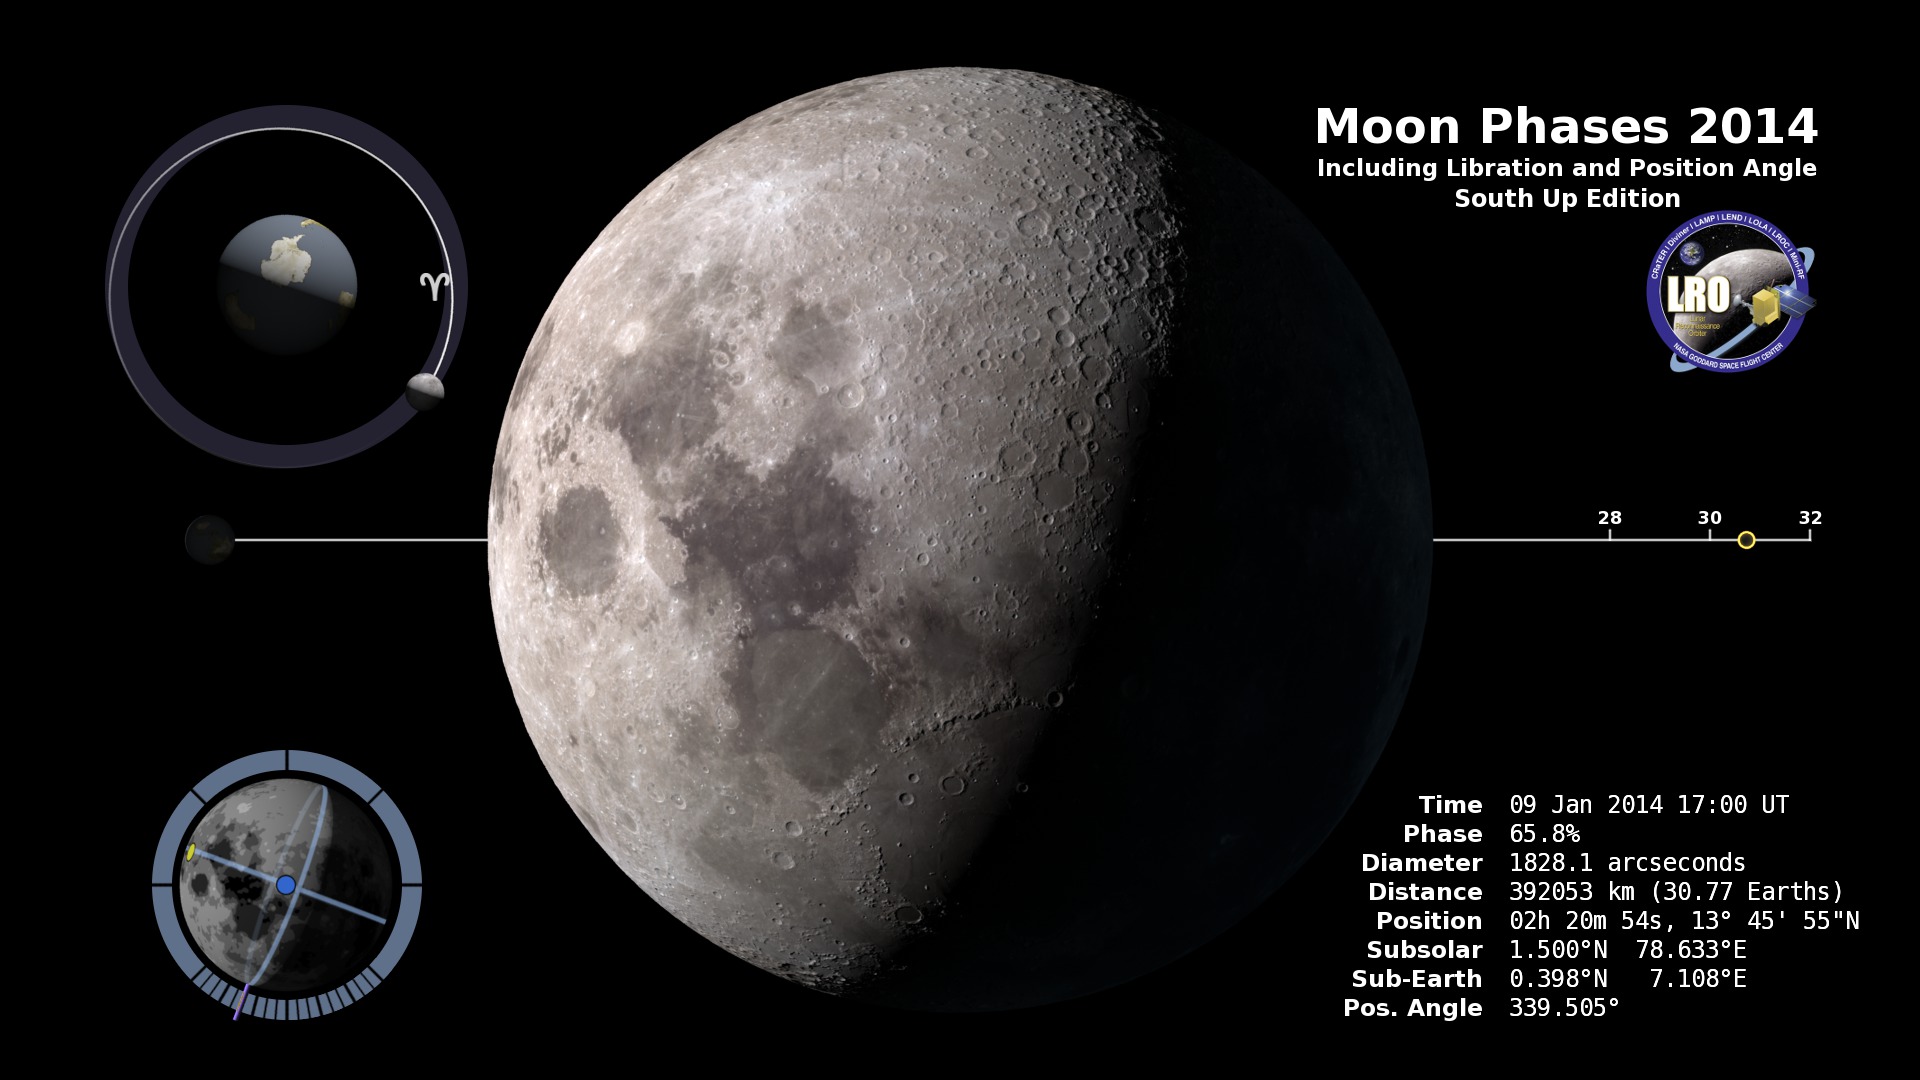 Preview Image for Moon Phase and Libration, 2014 South Up